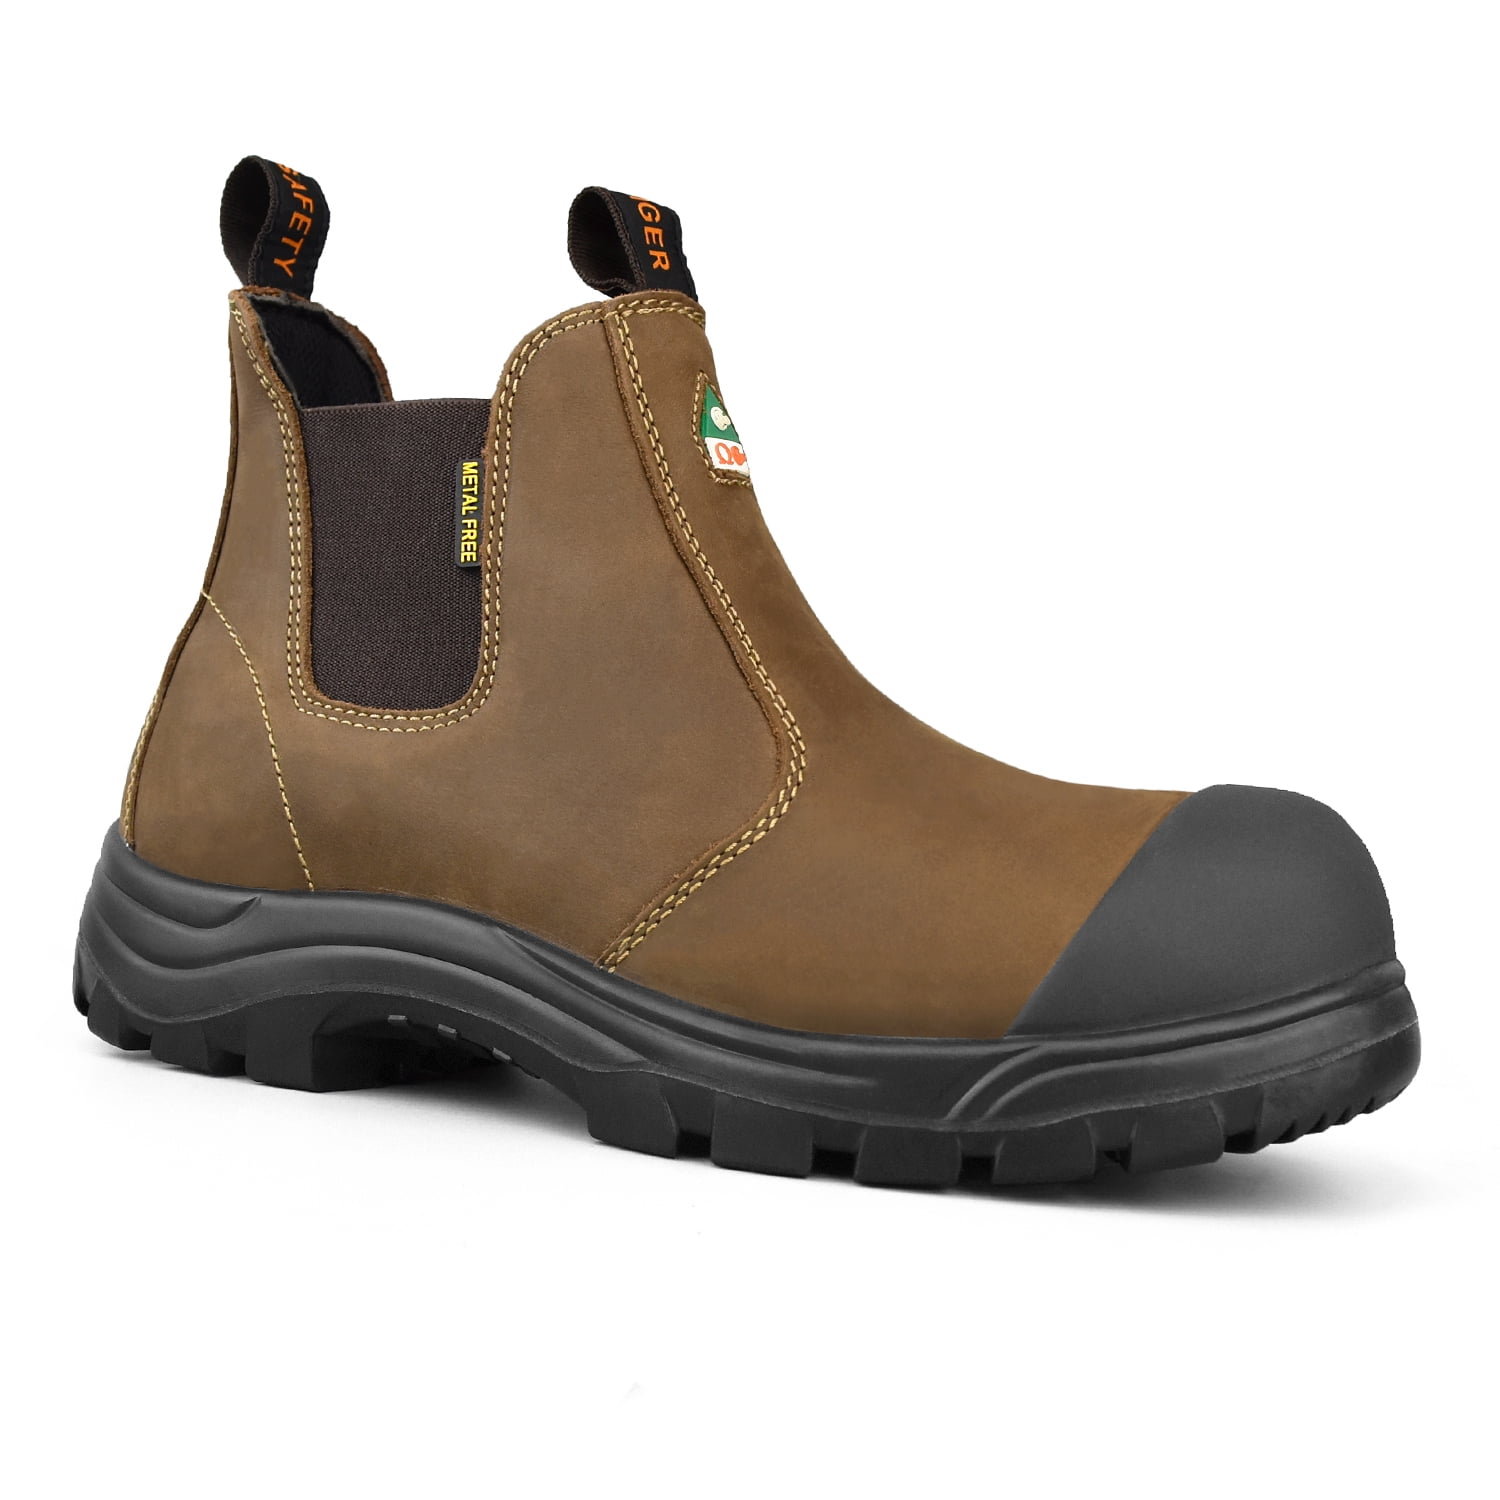 Tiger Safety CSA Men's Work Boots 